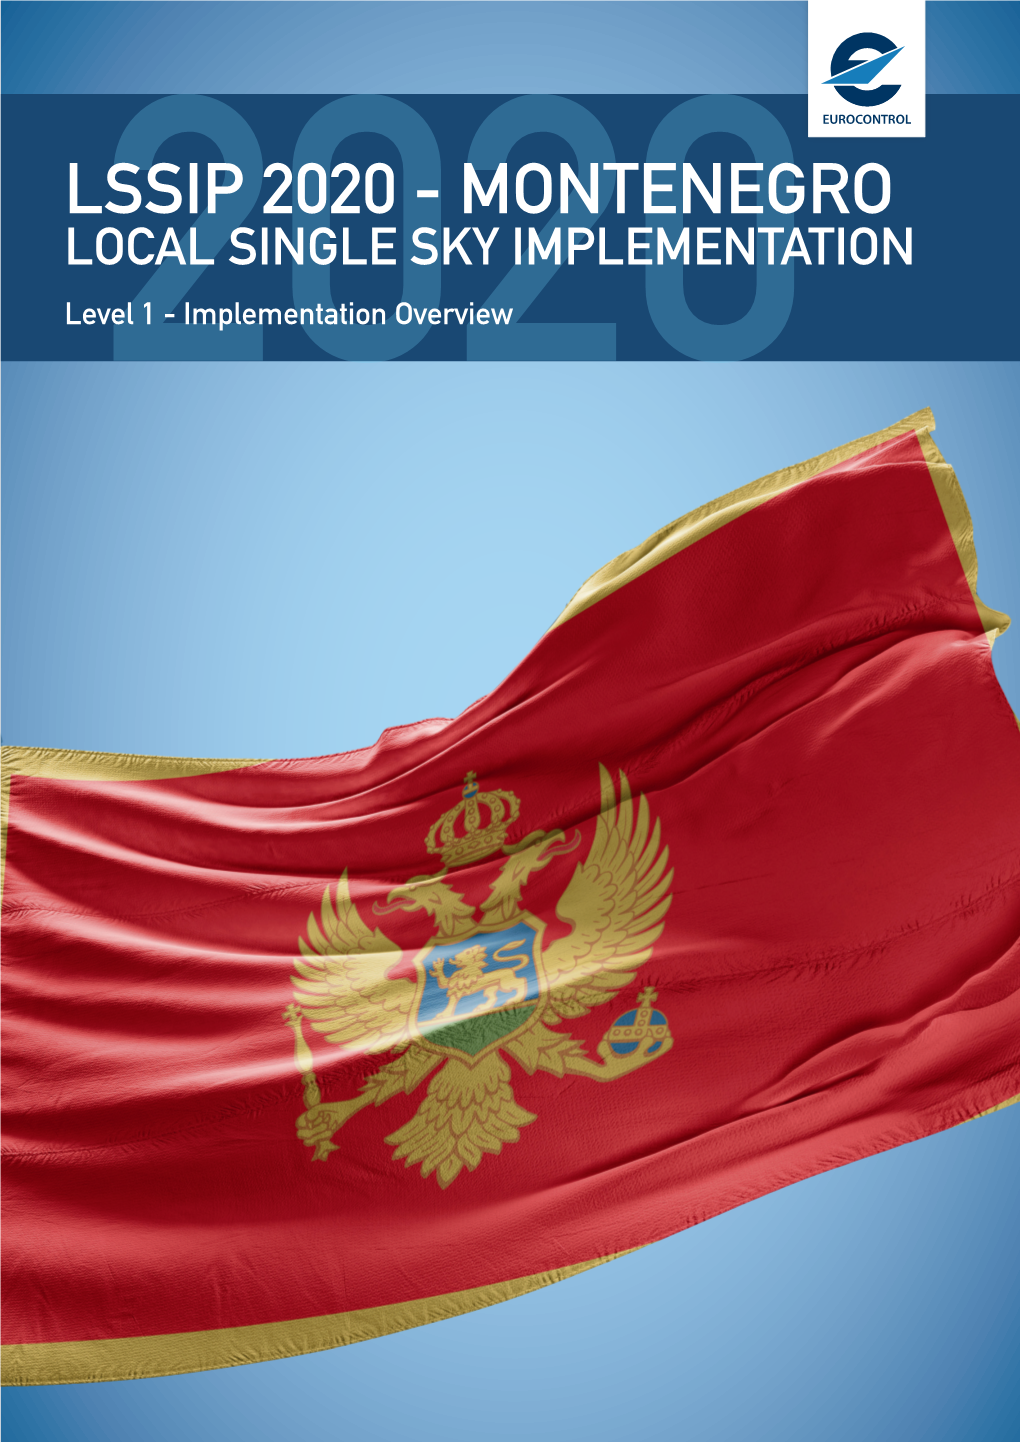 MONTENEGRO LOCAL SINGLE SKY IMPLEMENTATION Level2020 1 - Implementation Overview